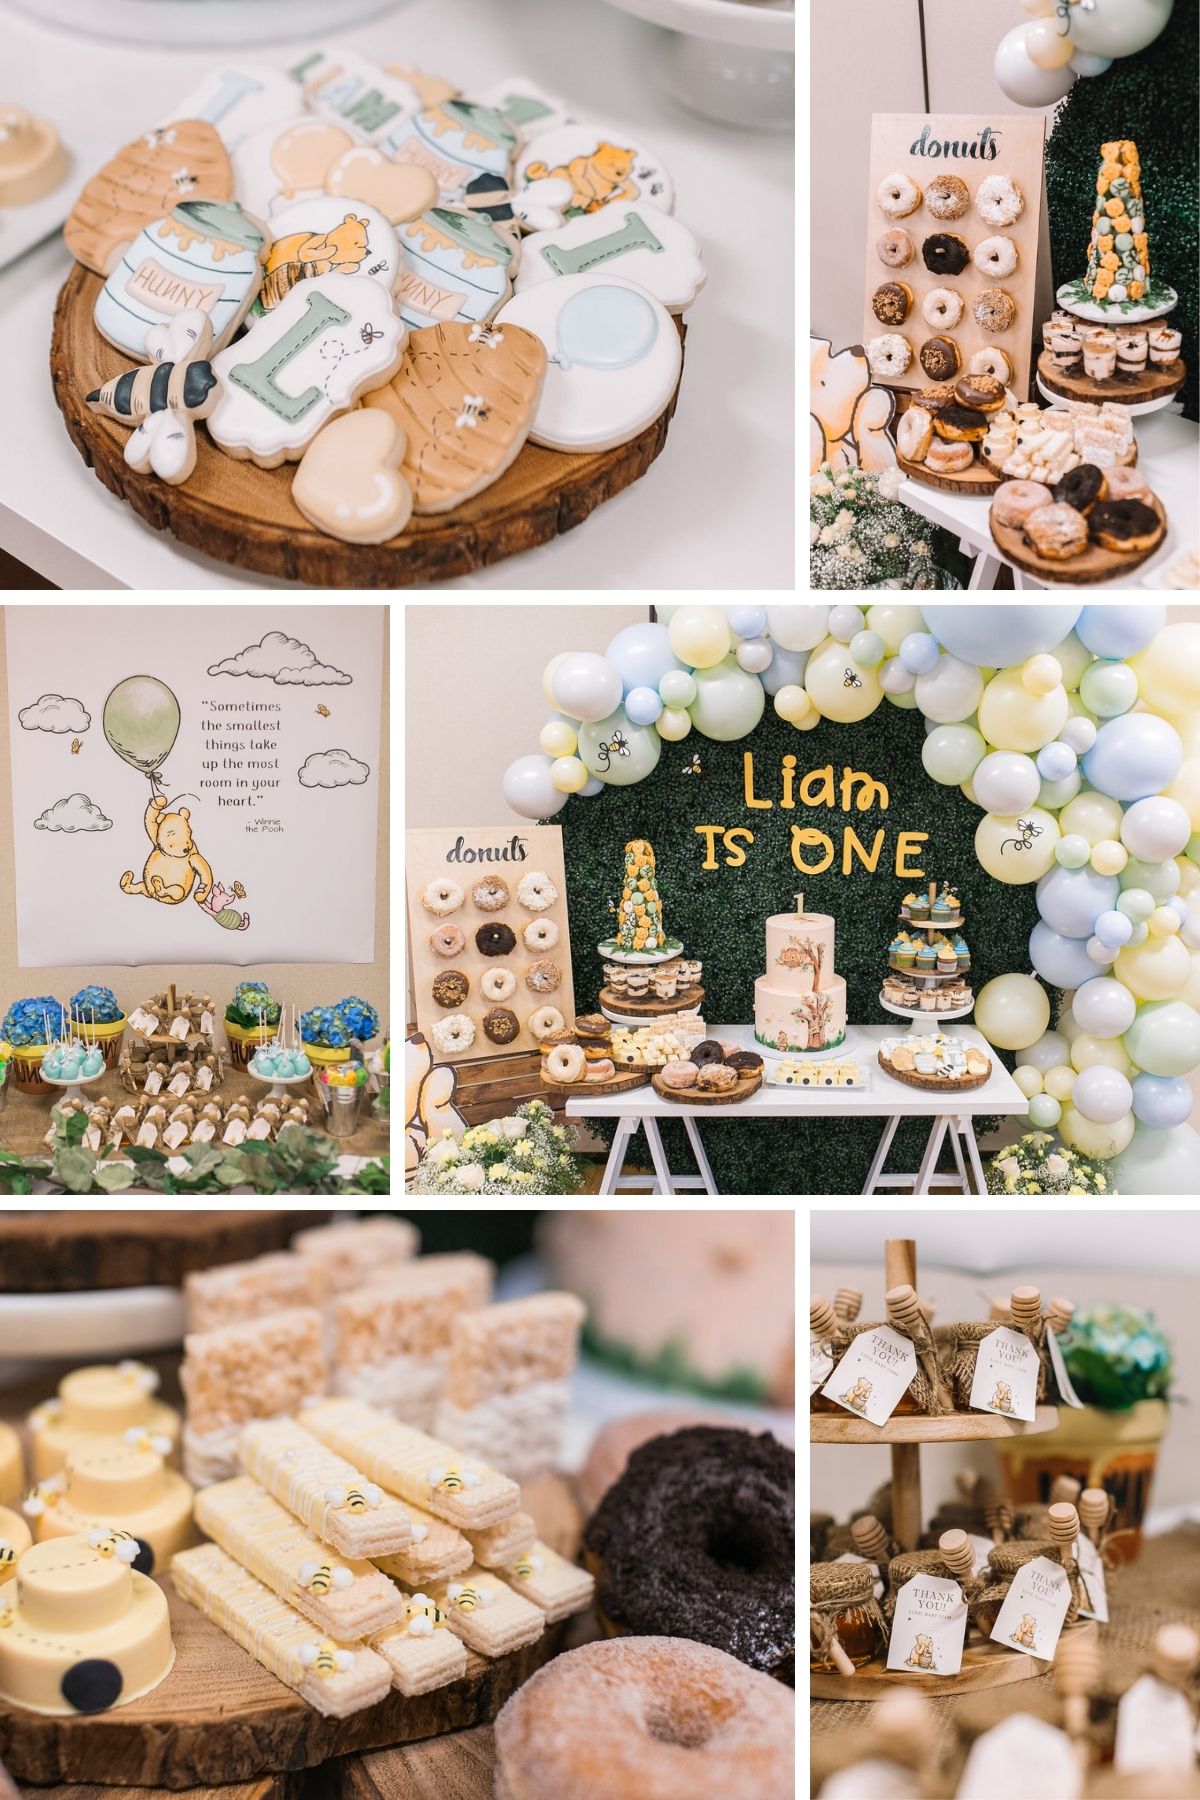 Photo collage for Winnie the Pooh party theme including cookies, cakes, and tablescapes.